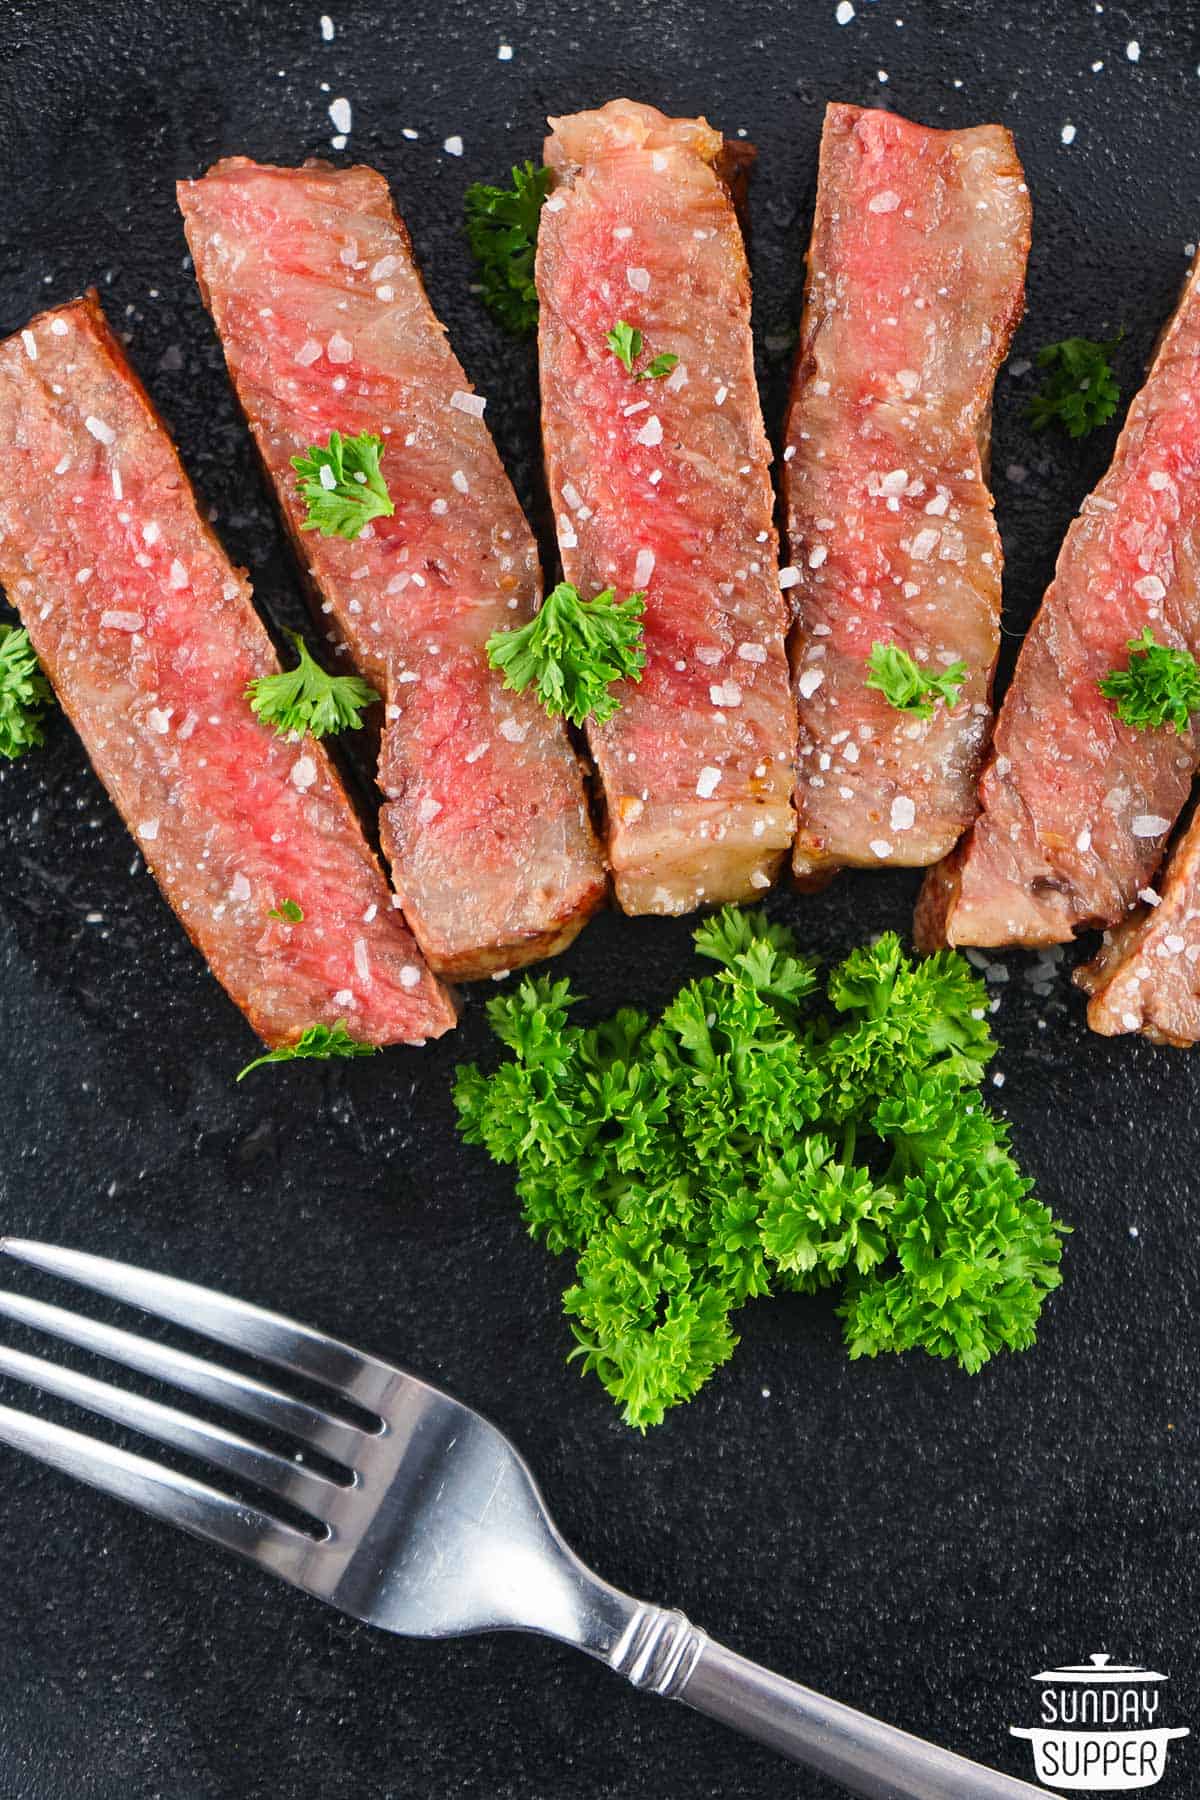 slices of wagyu steak on a black pan with parsley and a fork